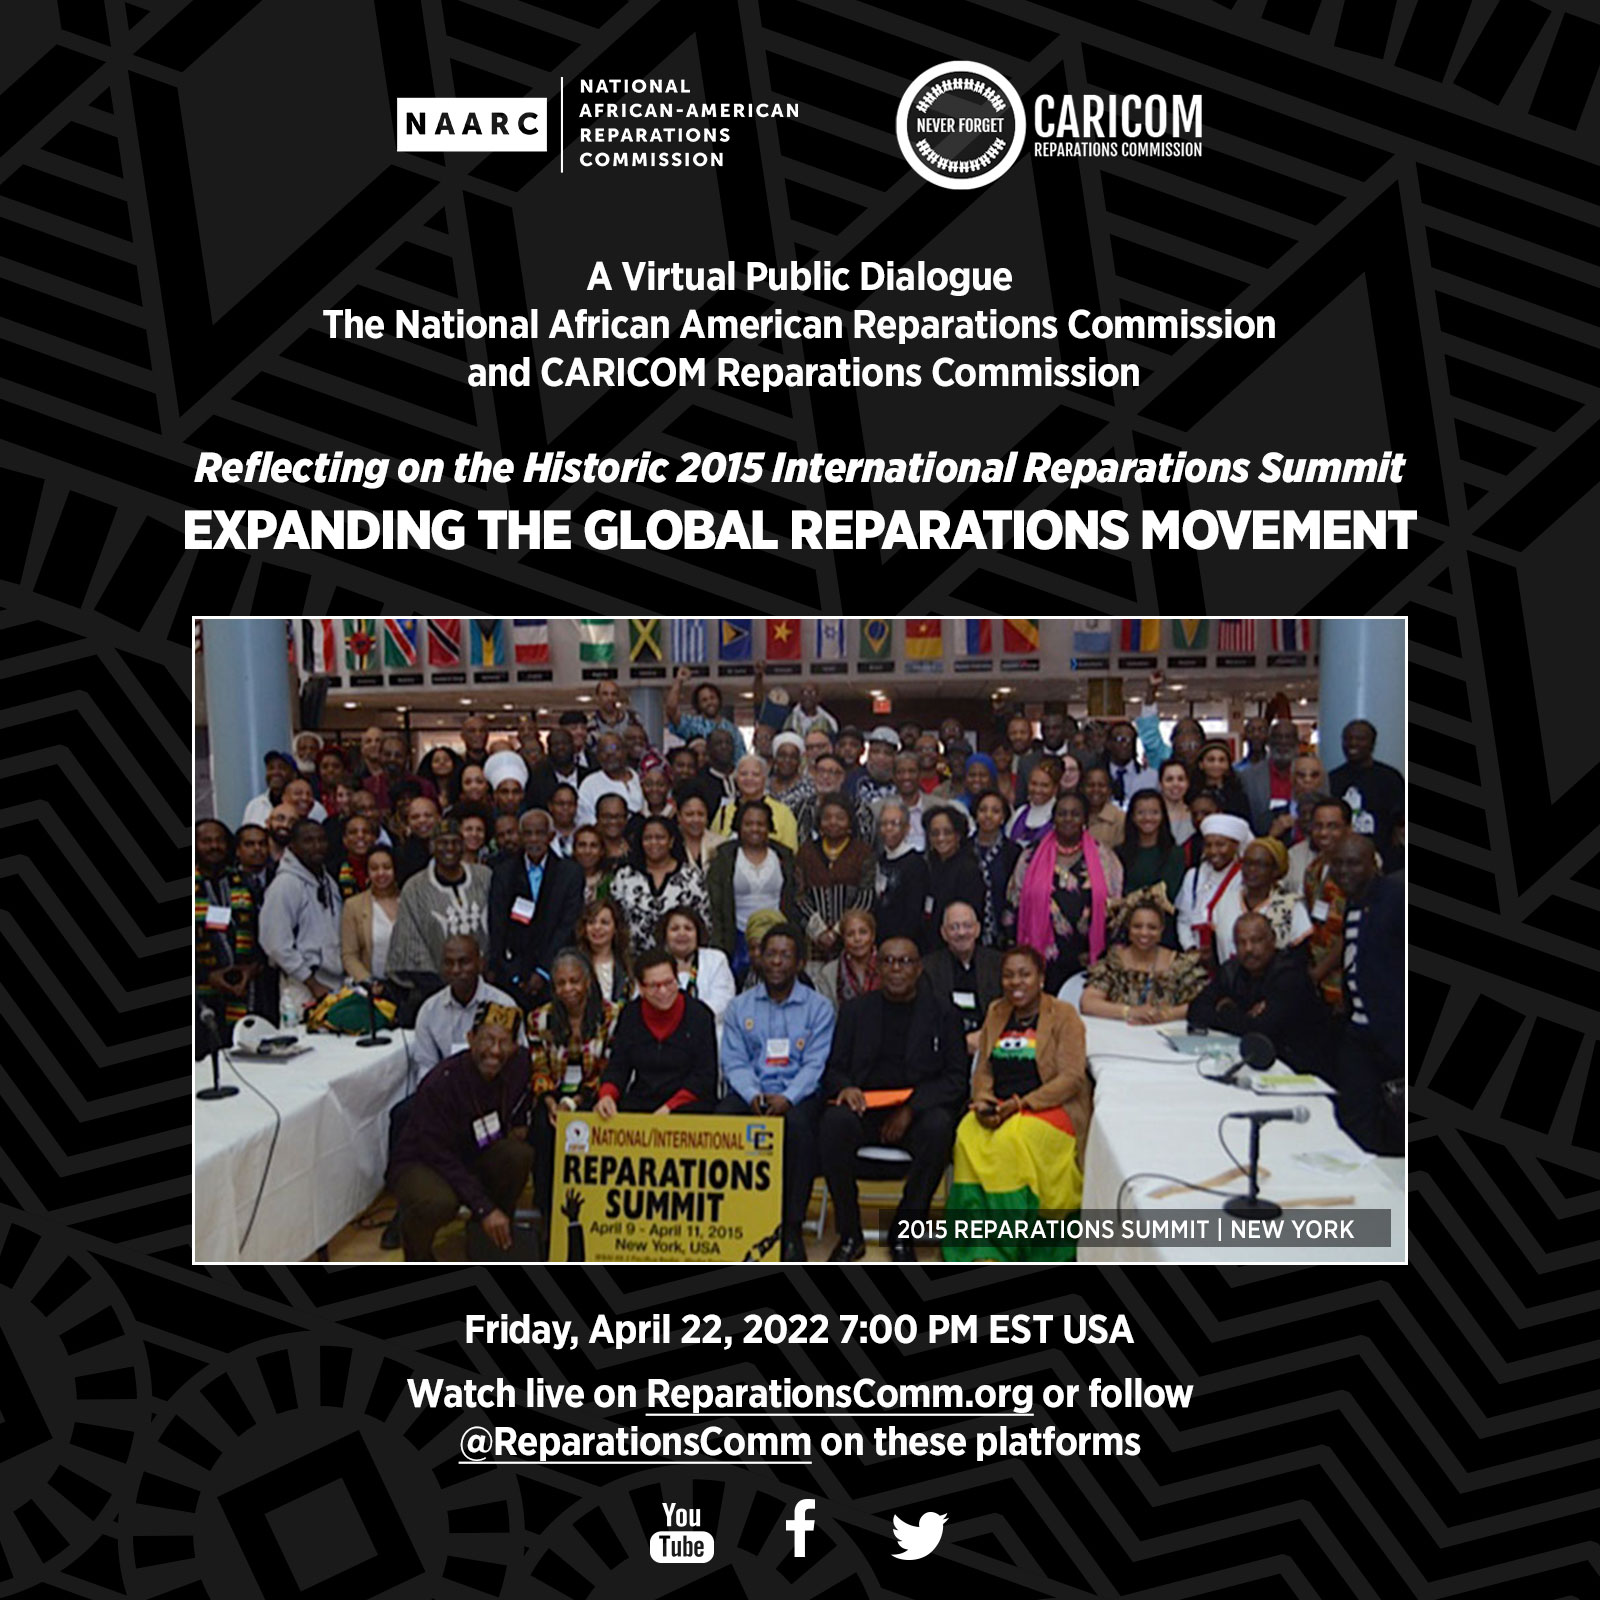 April 22, 2022 — Join the National African American Reparations Commission and the CARICOM Reparations Commission for a public virtual discussion and reflections on the historic 2015 International Reparations Summit.